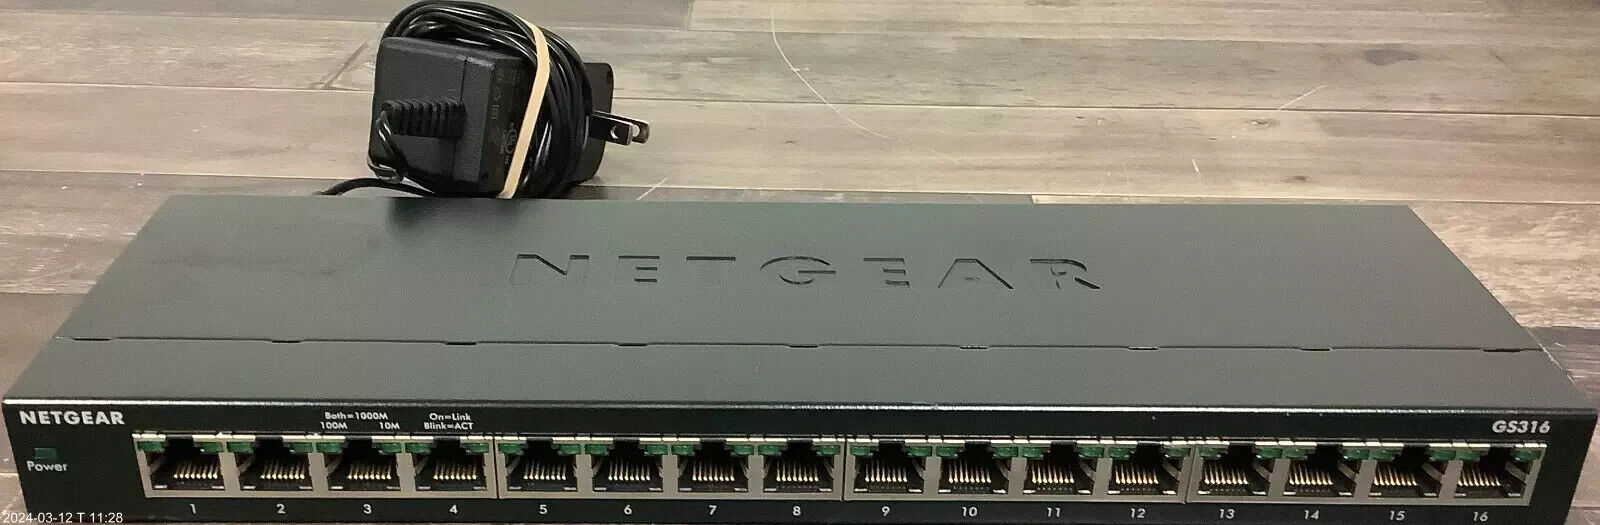 NETGEAR GS316-100NAS 16 Ports Standalone Ethernet Switch TESTED - EXCELLENT